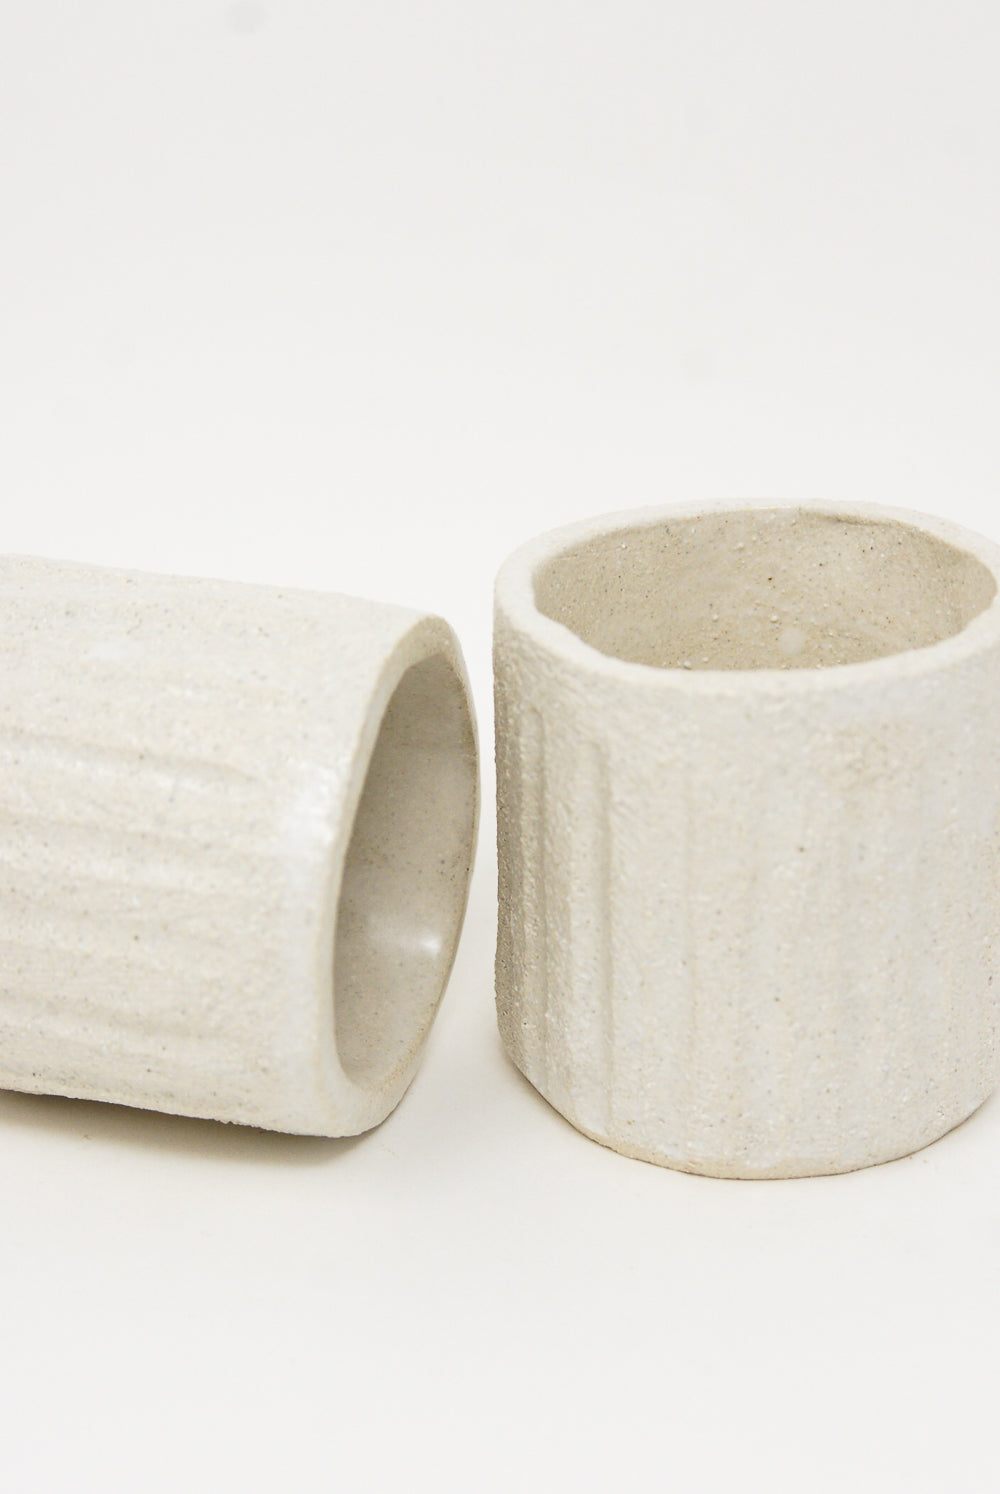 Two Clandestine tea cups in natural on a white surface.